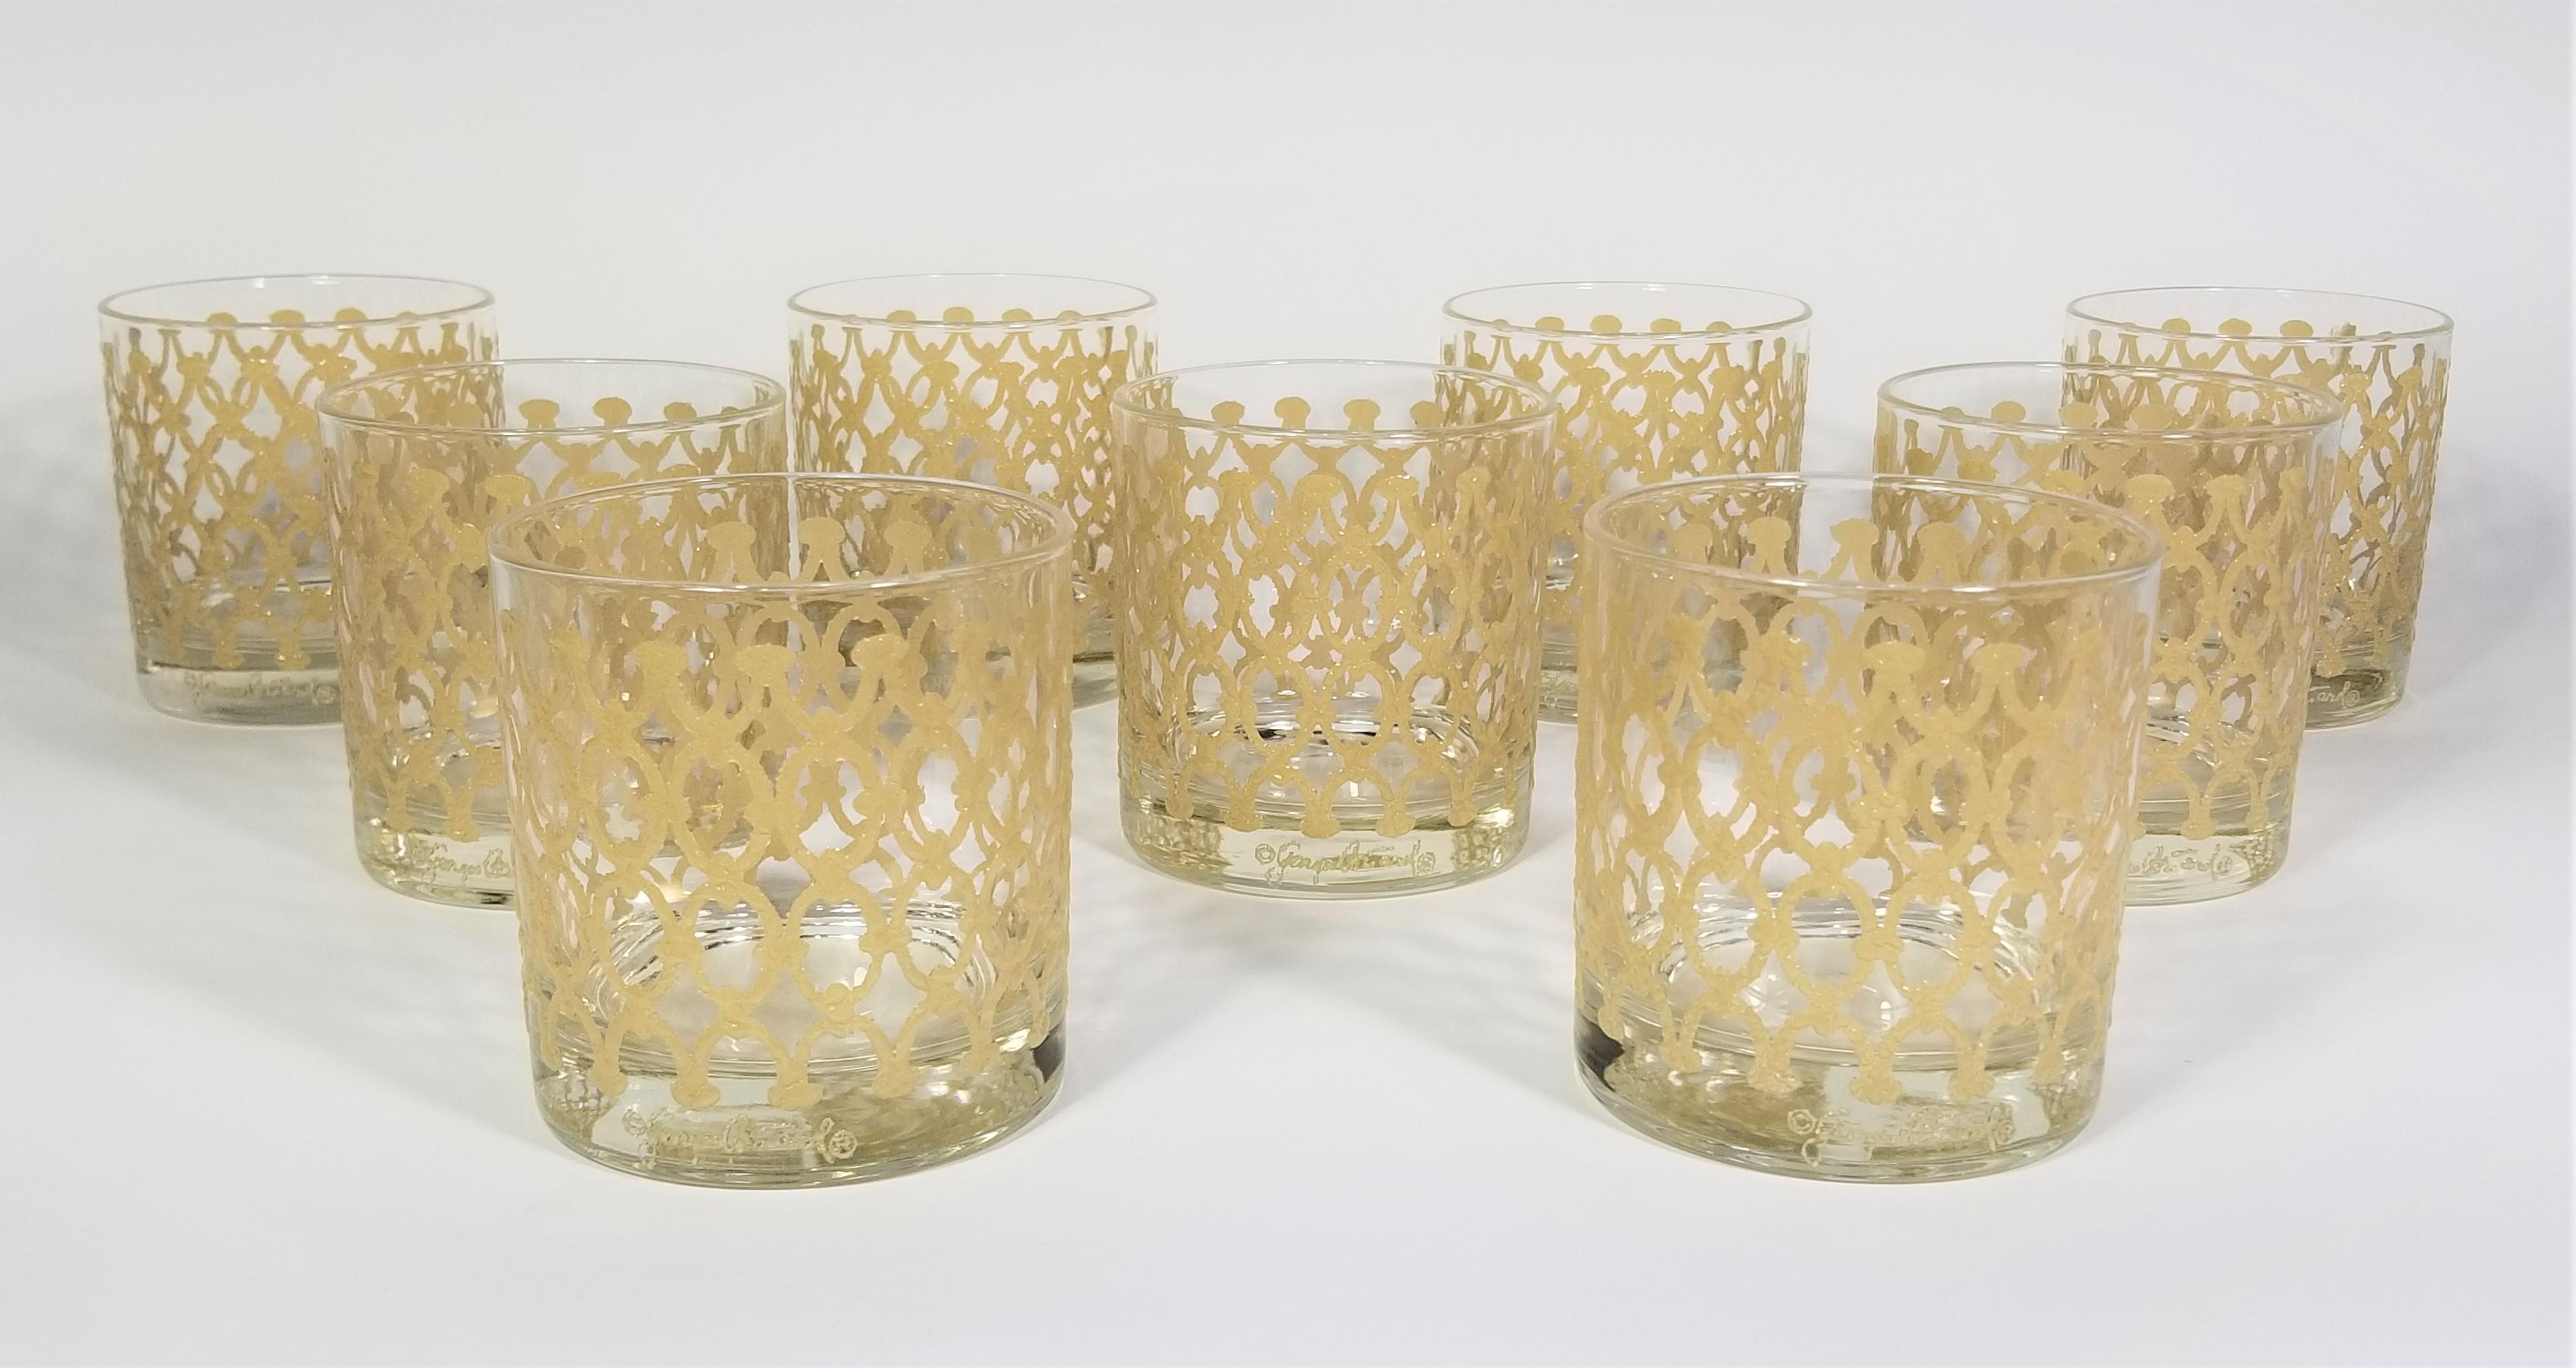 Mid-century 1970s Georges Briard Glassware Barware. 
Set of 9. All glasses are signed and in excellent condition.